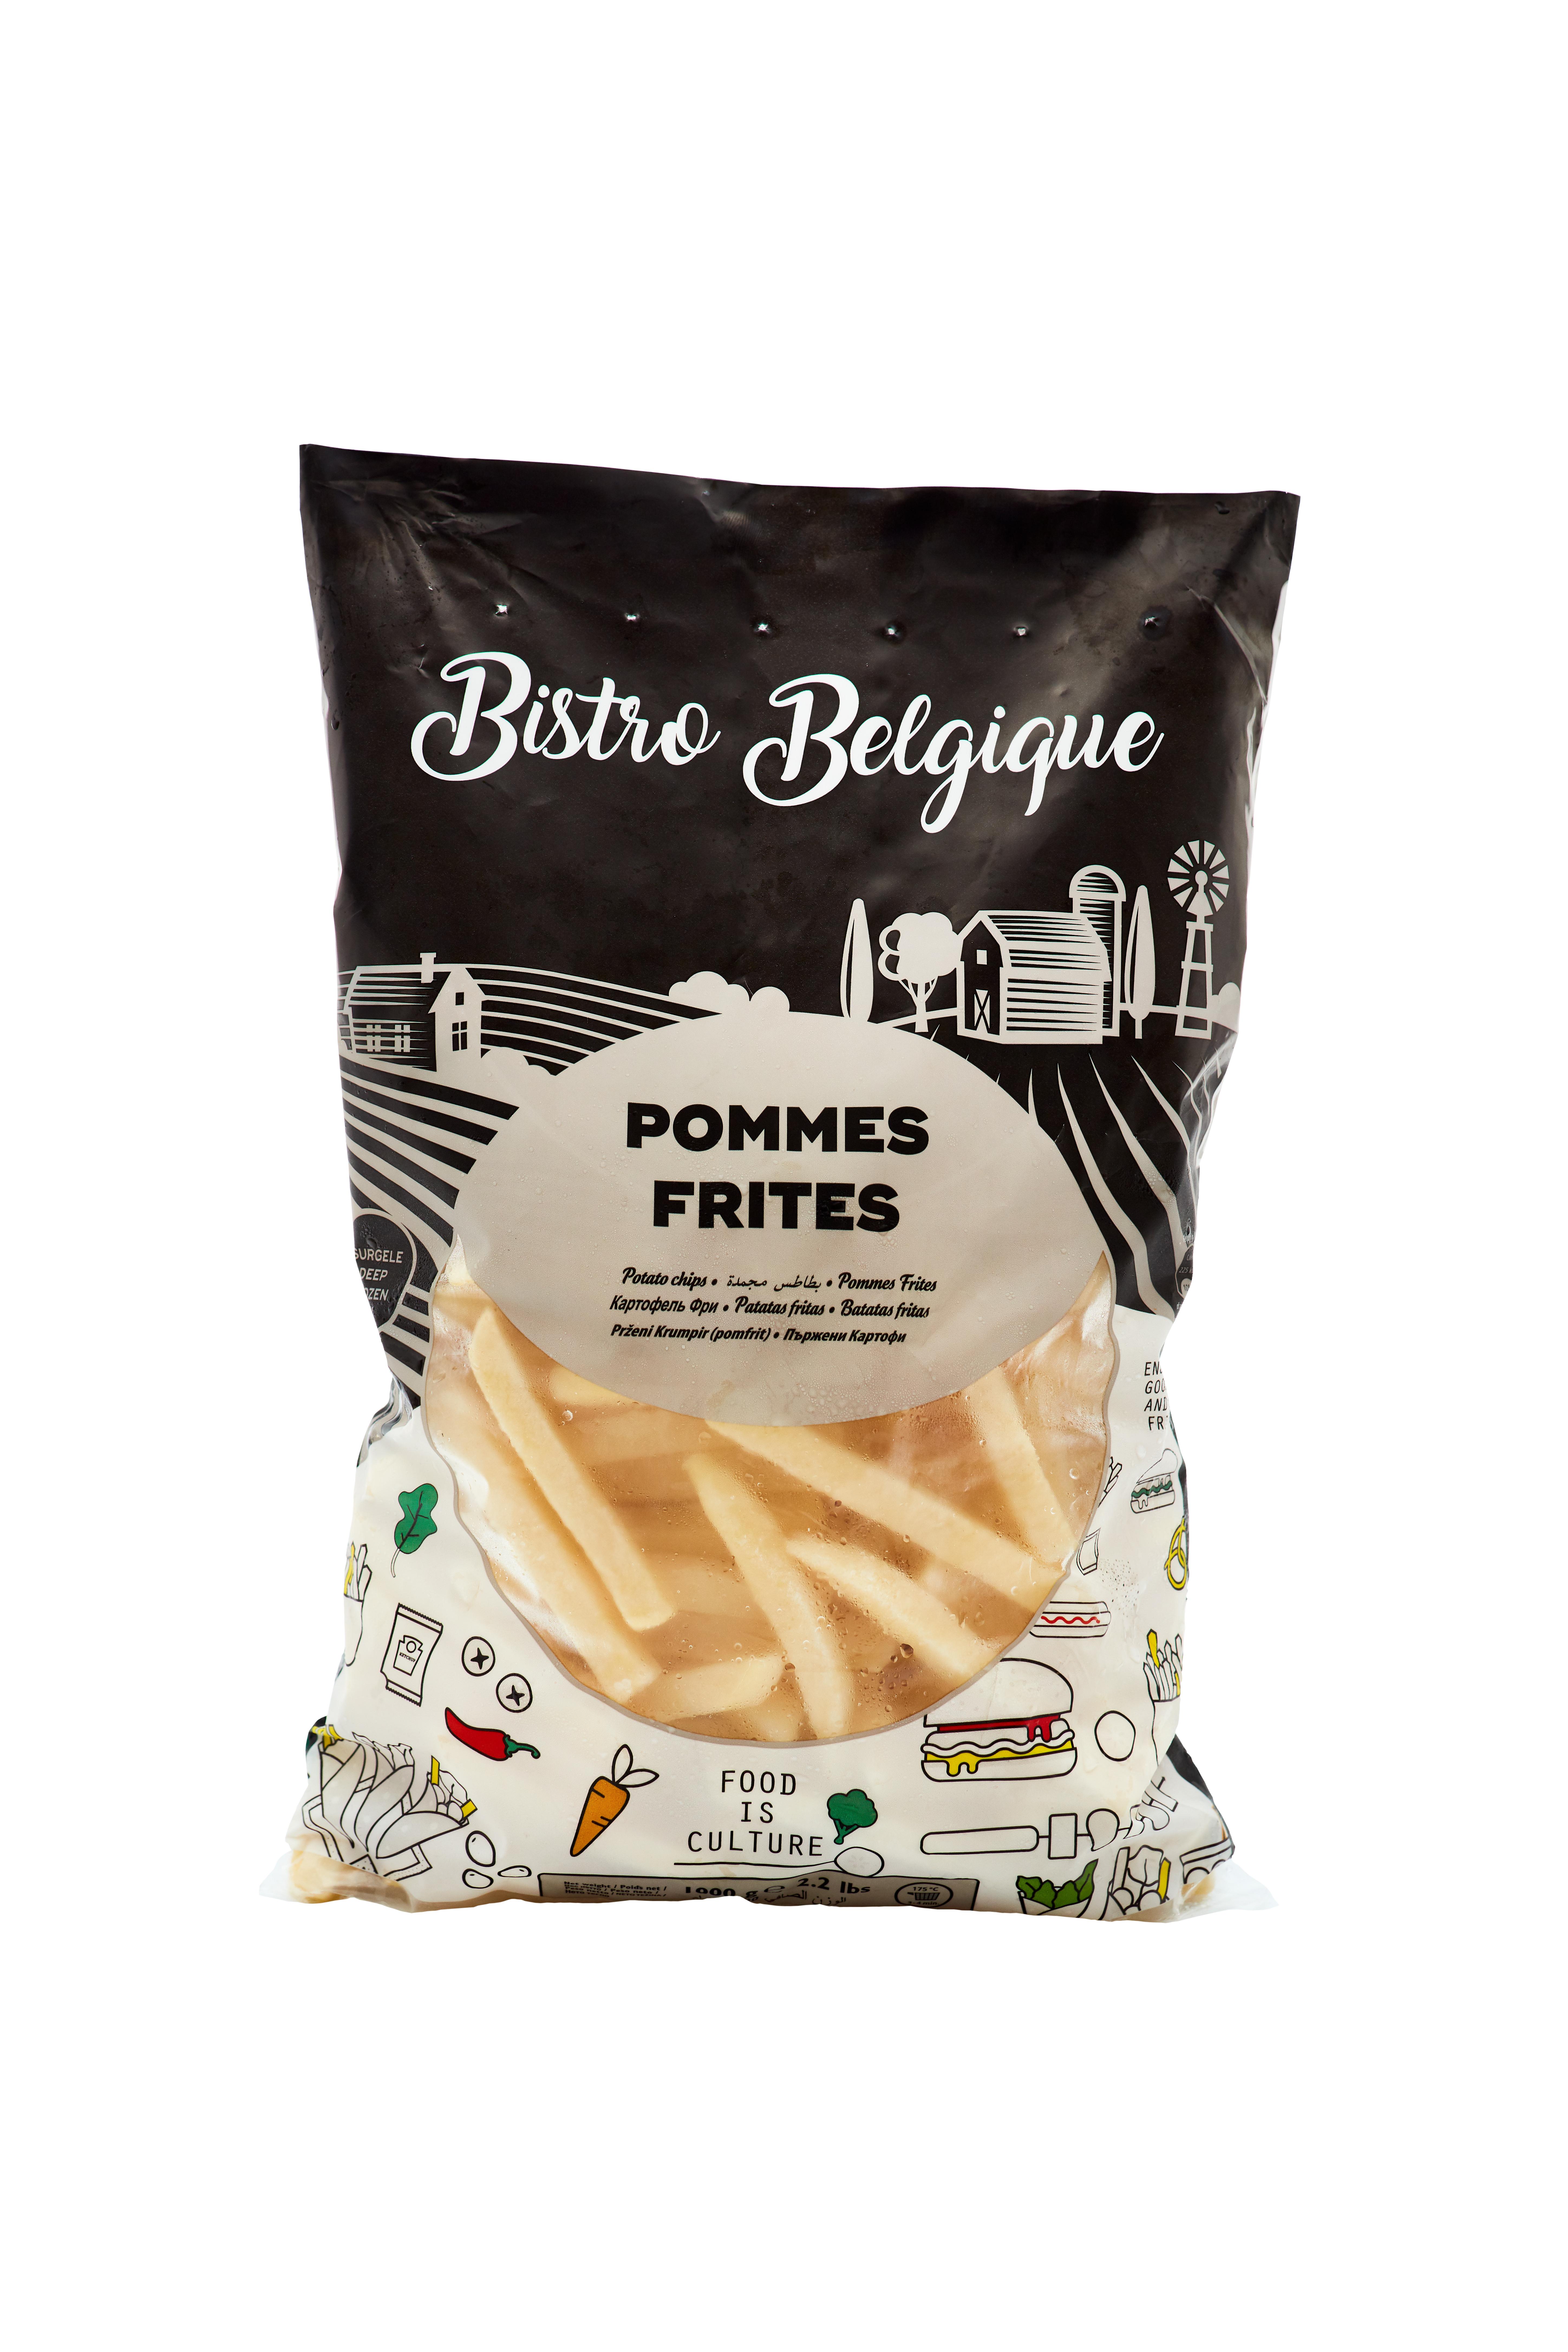 French fries 14x14mm packaging Bistro Belgique brand